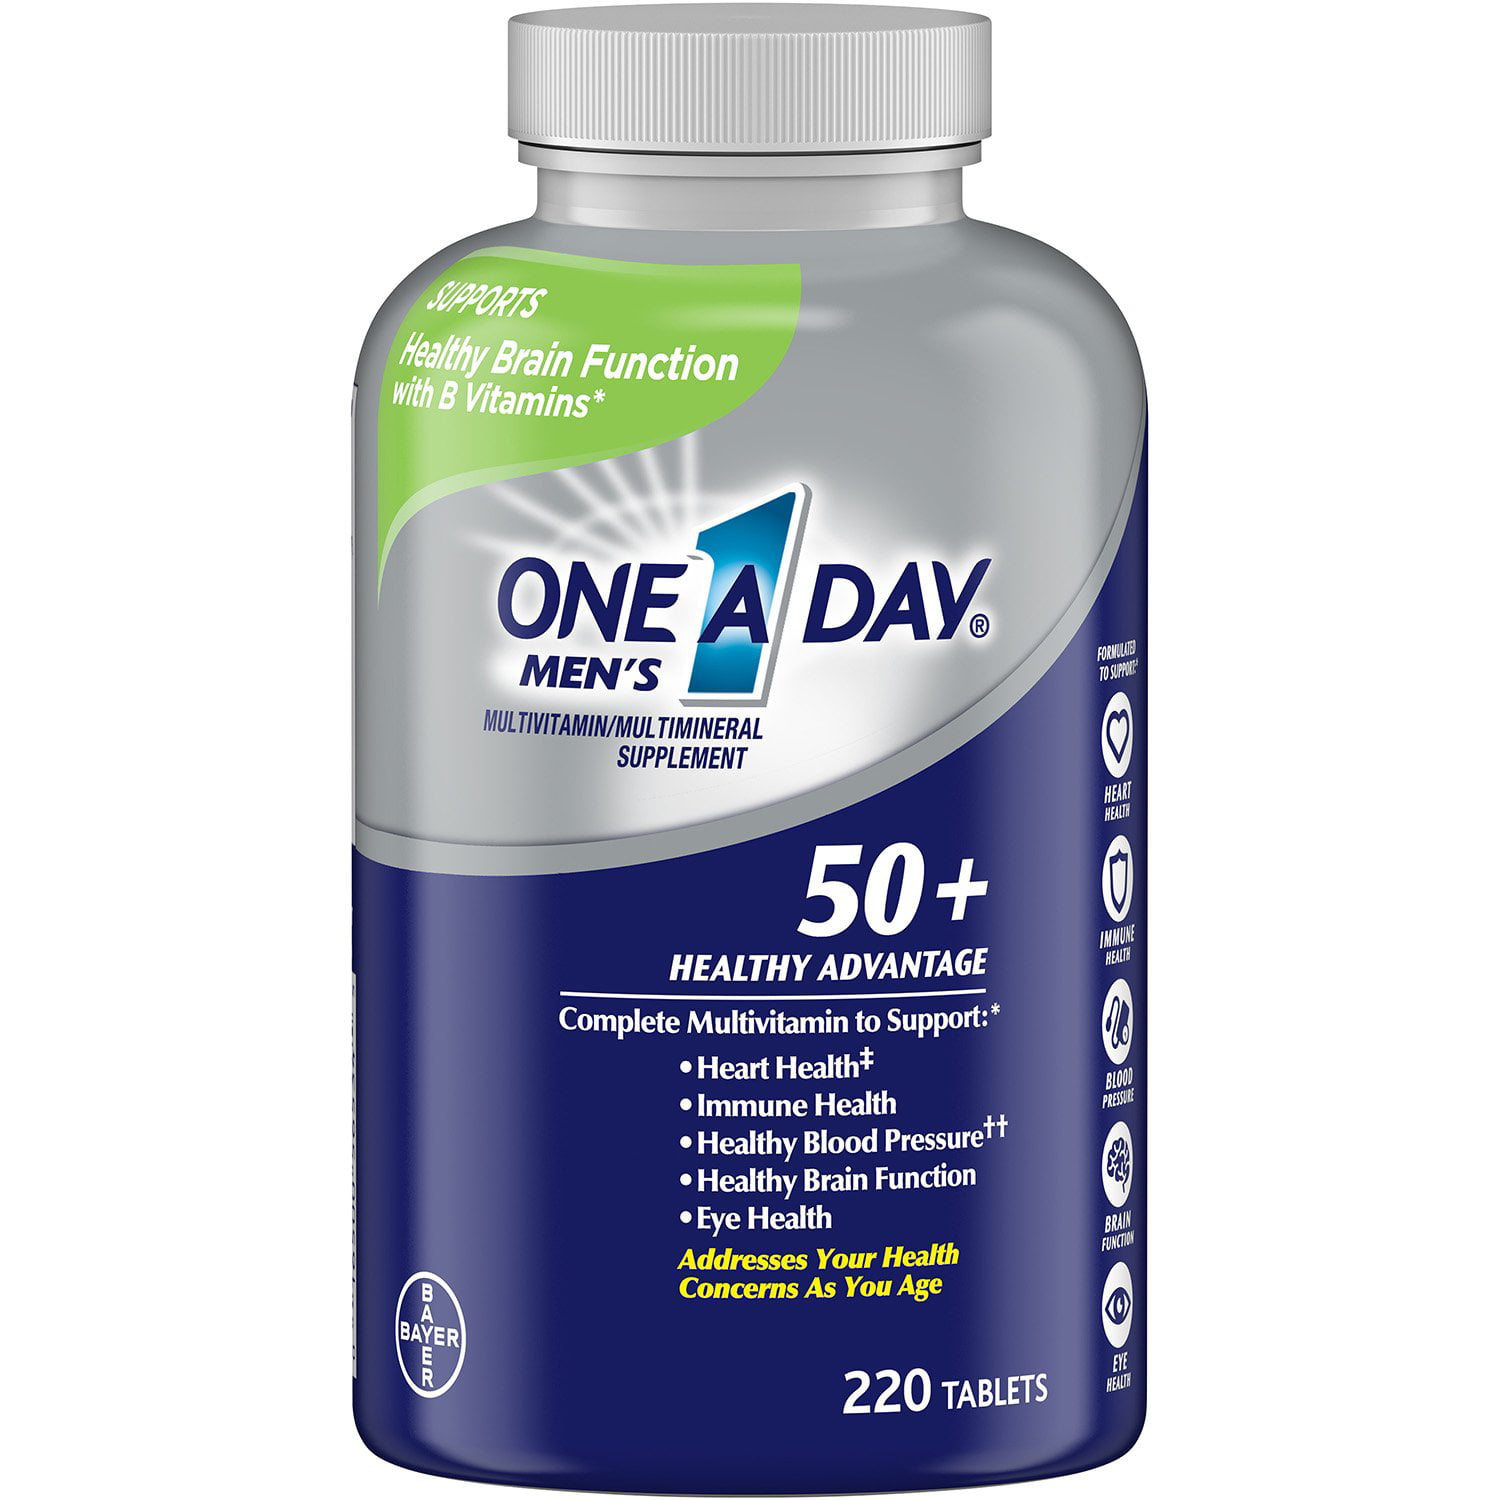 One A Day Men's 50+ Multivitamin (220 tablets)